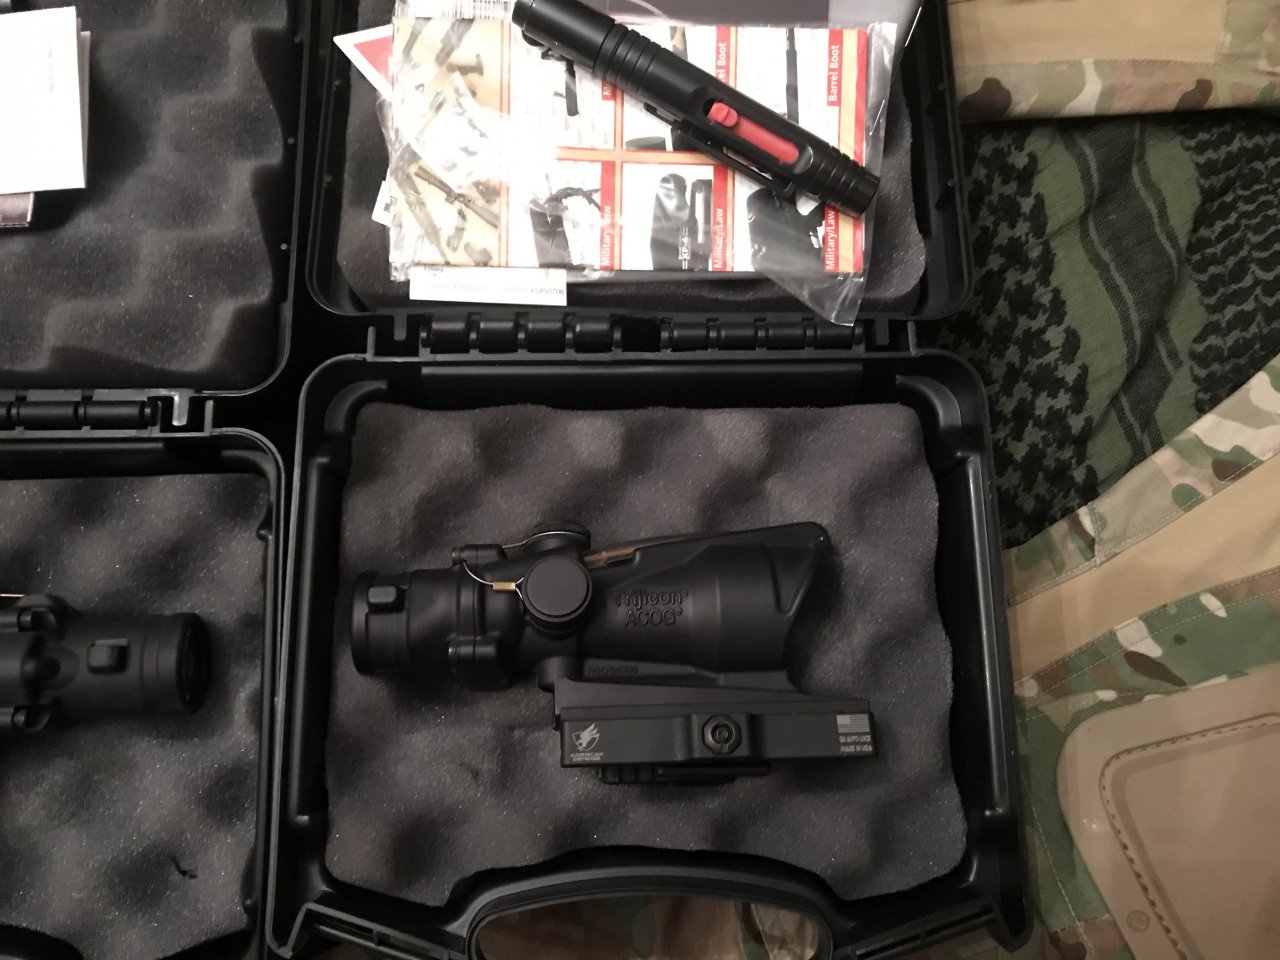 Trijicon TA31H-68 - Dual Illum 4X32 ACOG with red 6.8 Horseshoe and ADM mount Great condition, Brand New, Box and paperwork - $950